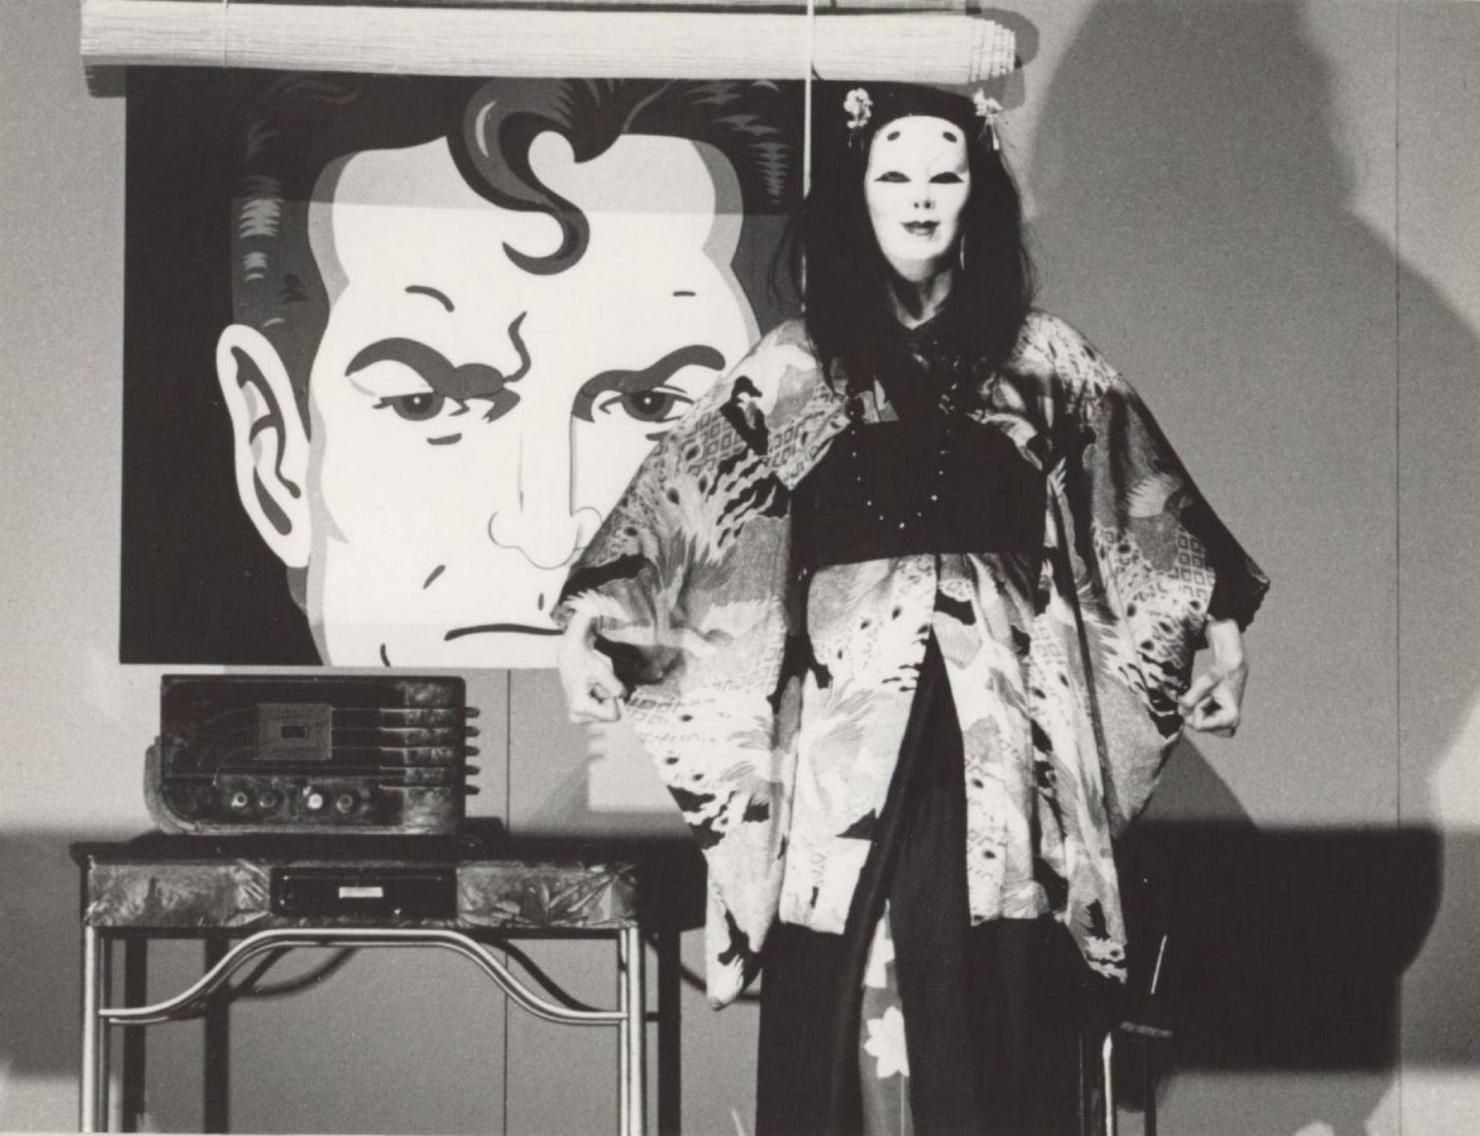 Black and white image with a cartoon depiction of Superman in the background. In the foreground an actor wears a mask and a kimono and listens to an old-fashioned radio.